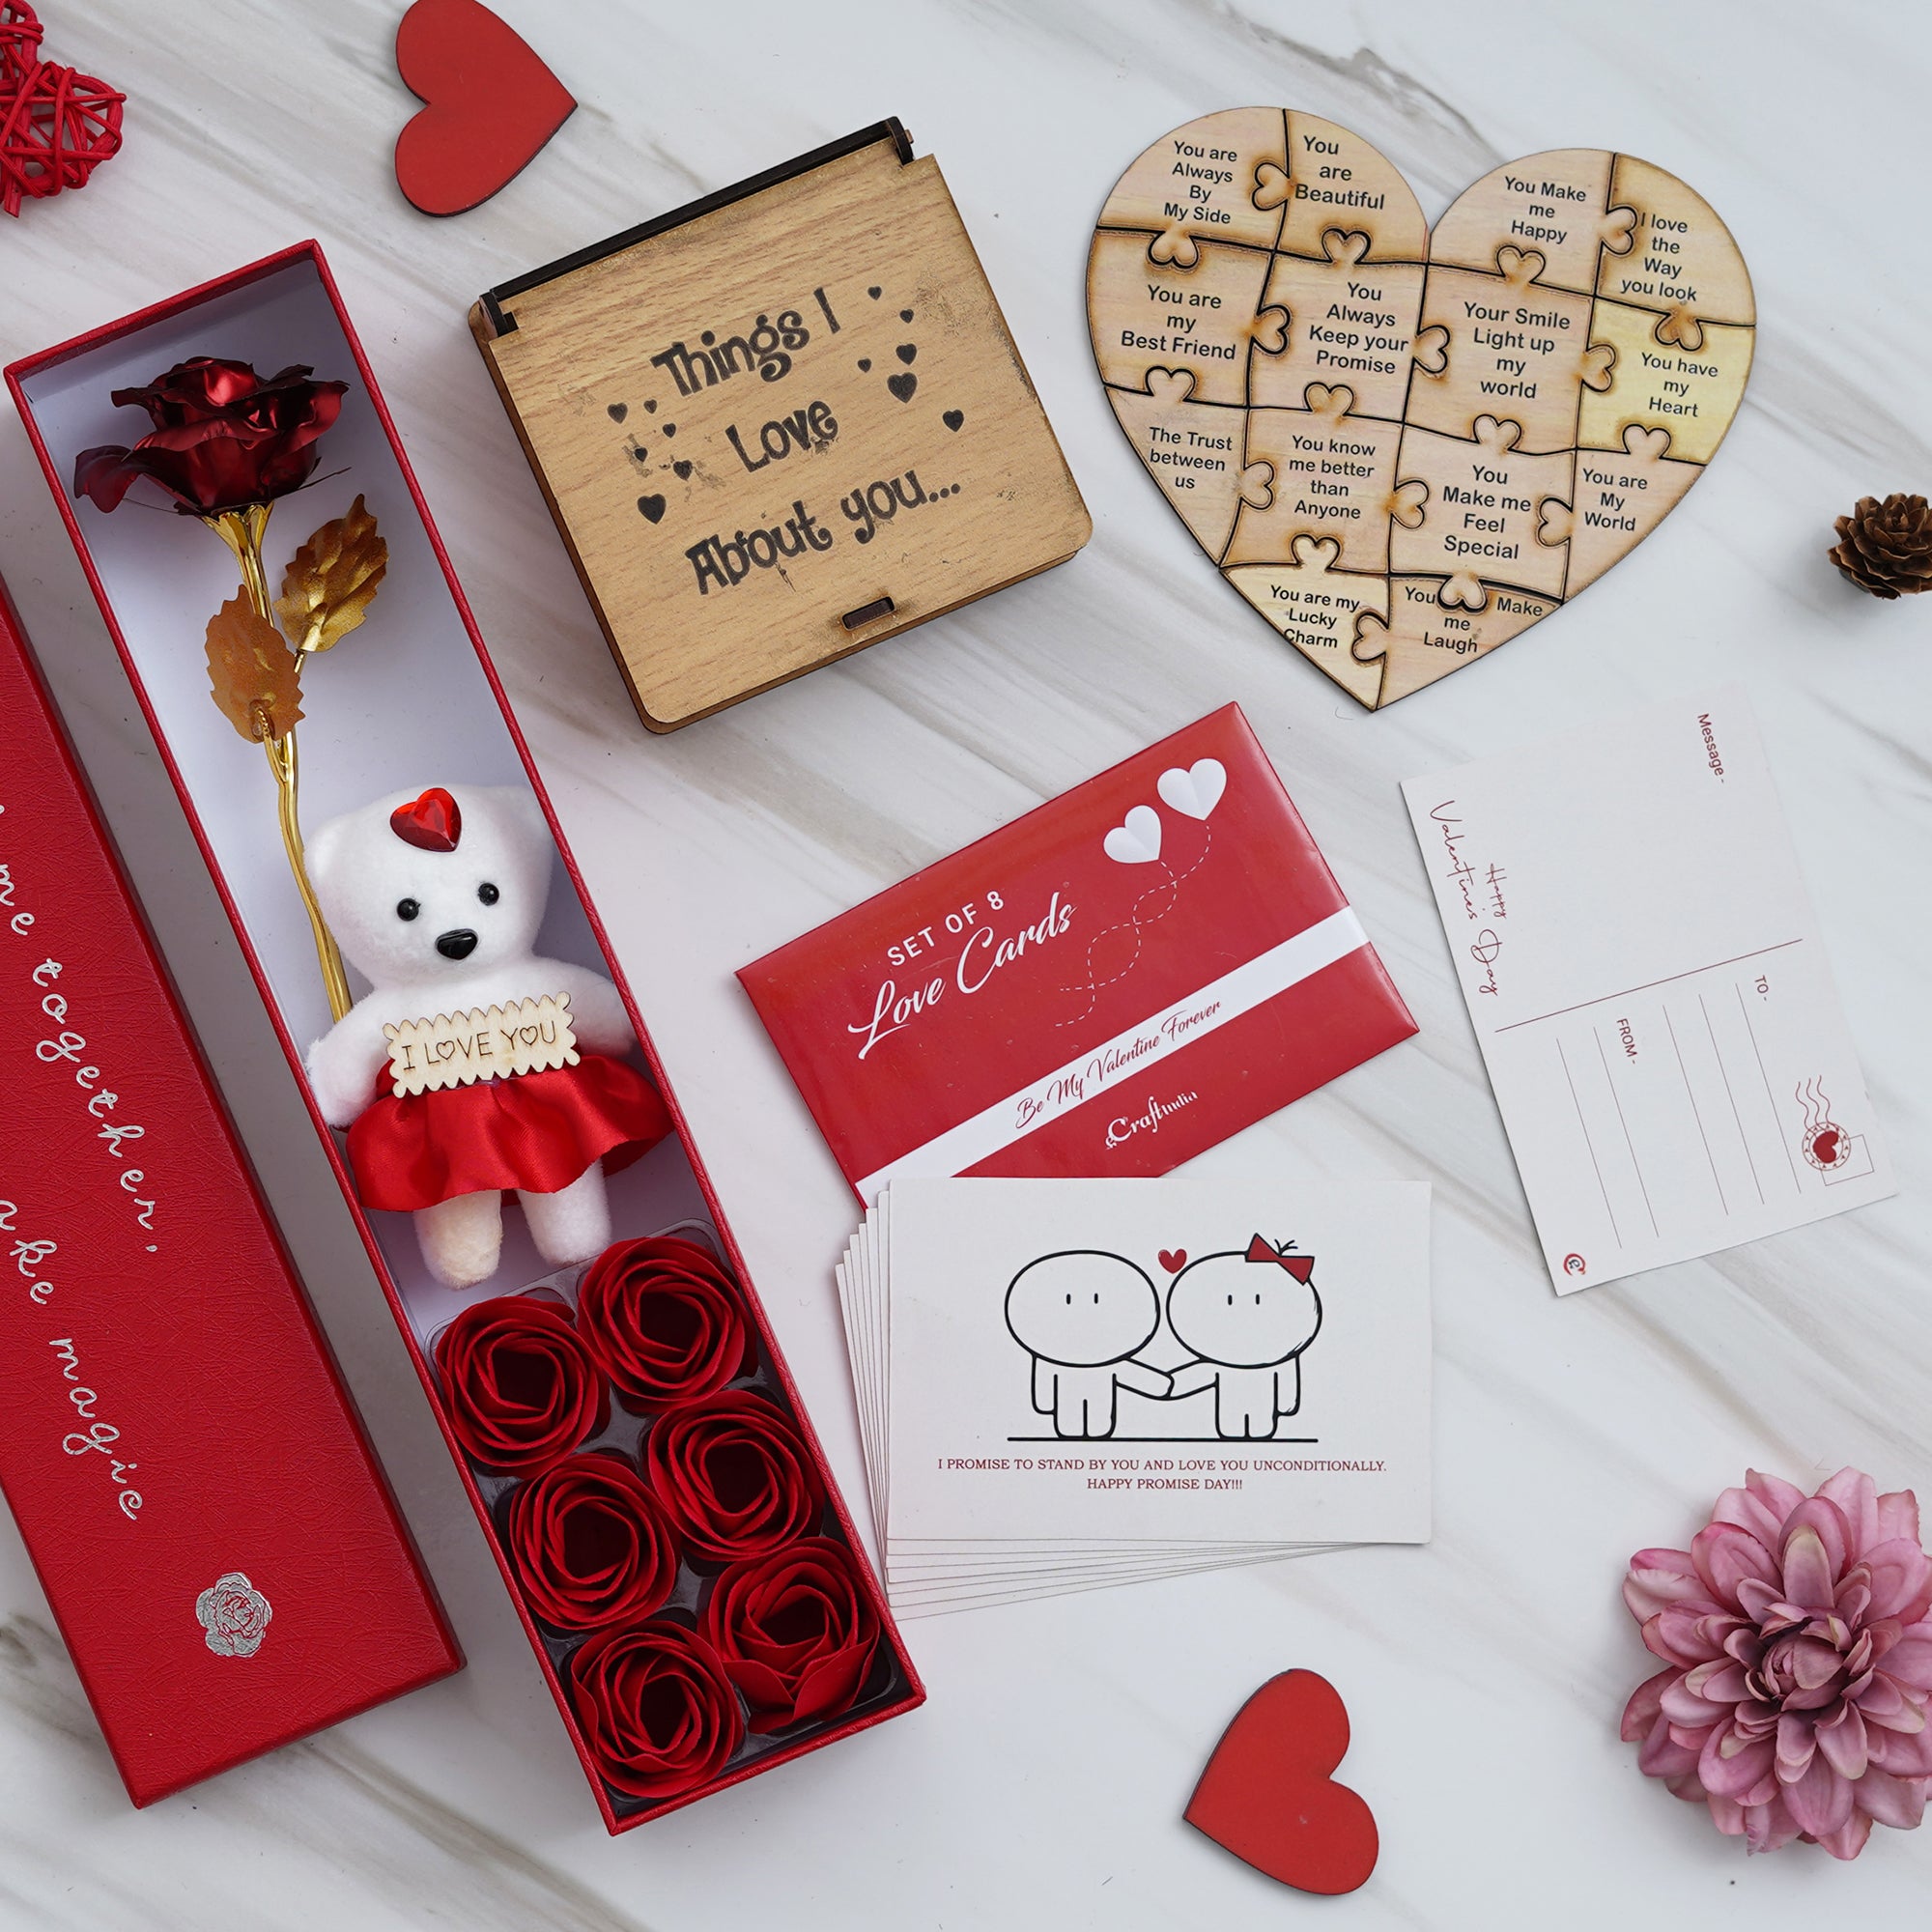 Valentine Combo of Set of 8 Love Post Cards Gift Cards Set, Red Gift Box with Teddy & Roses, "Things I Love About You" Puzzle Wooden Gift Set